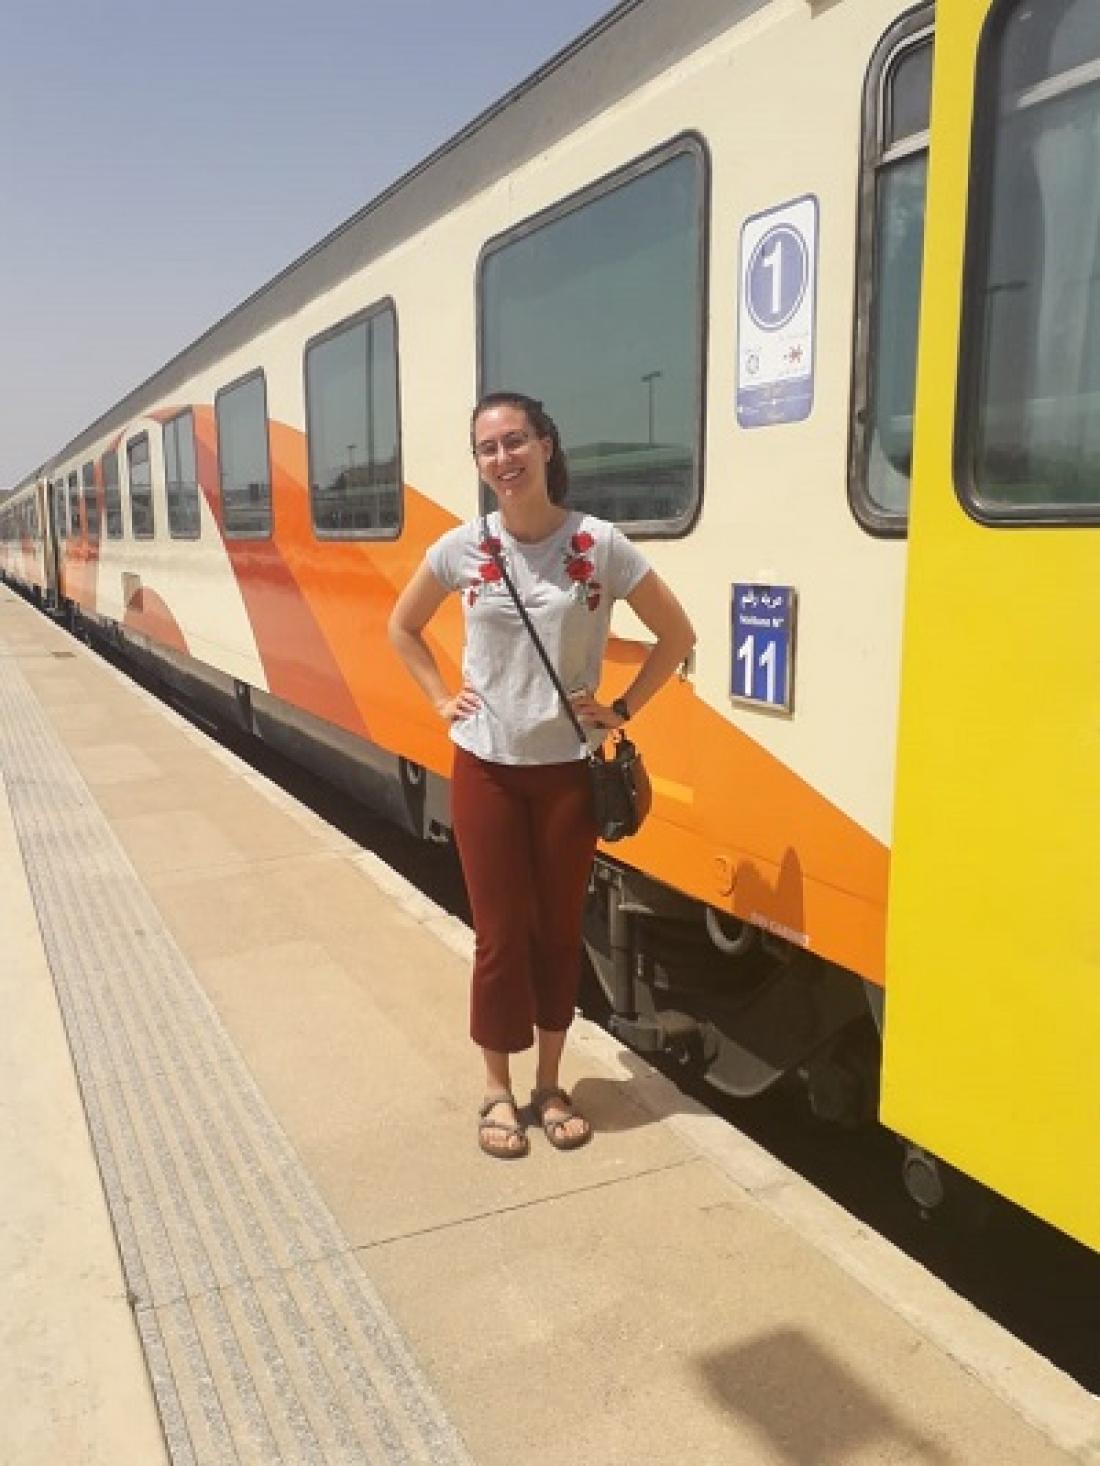 The author standing next to a train in Morocco. Photo: Jane Viviano